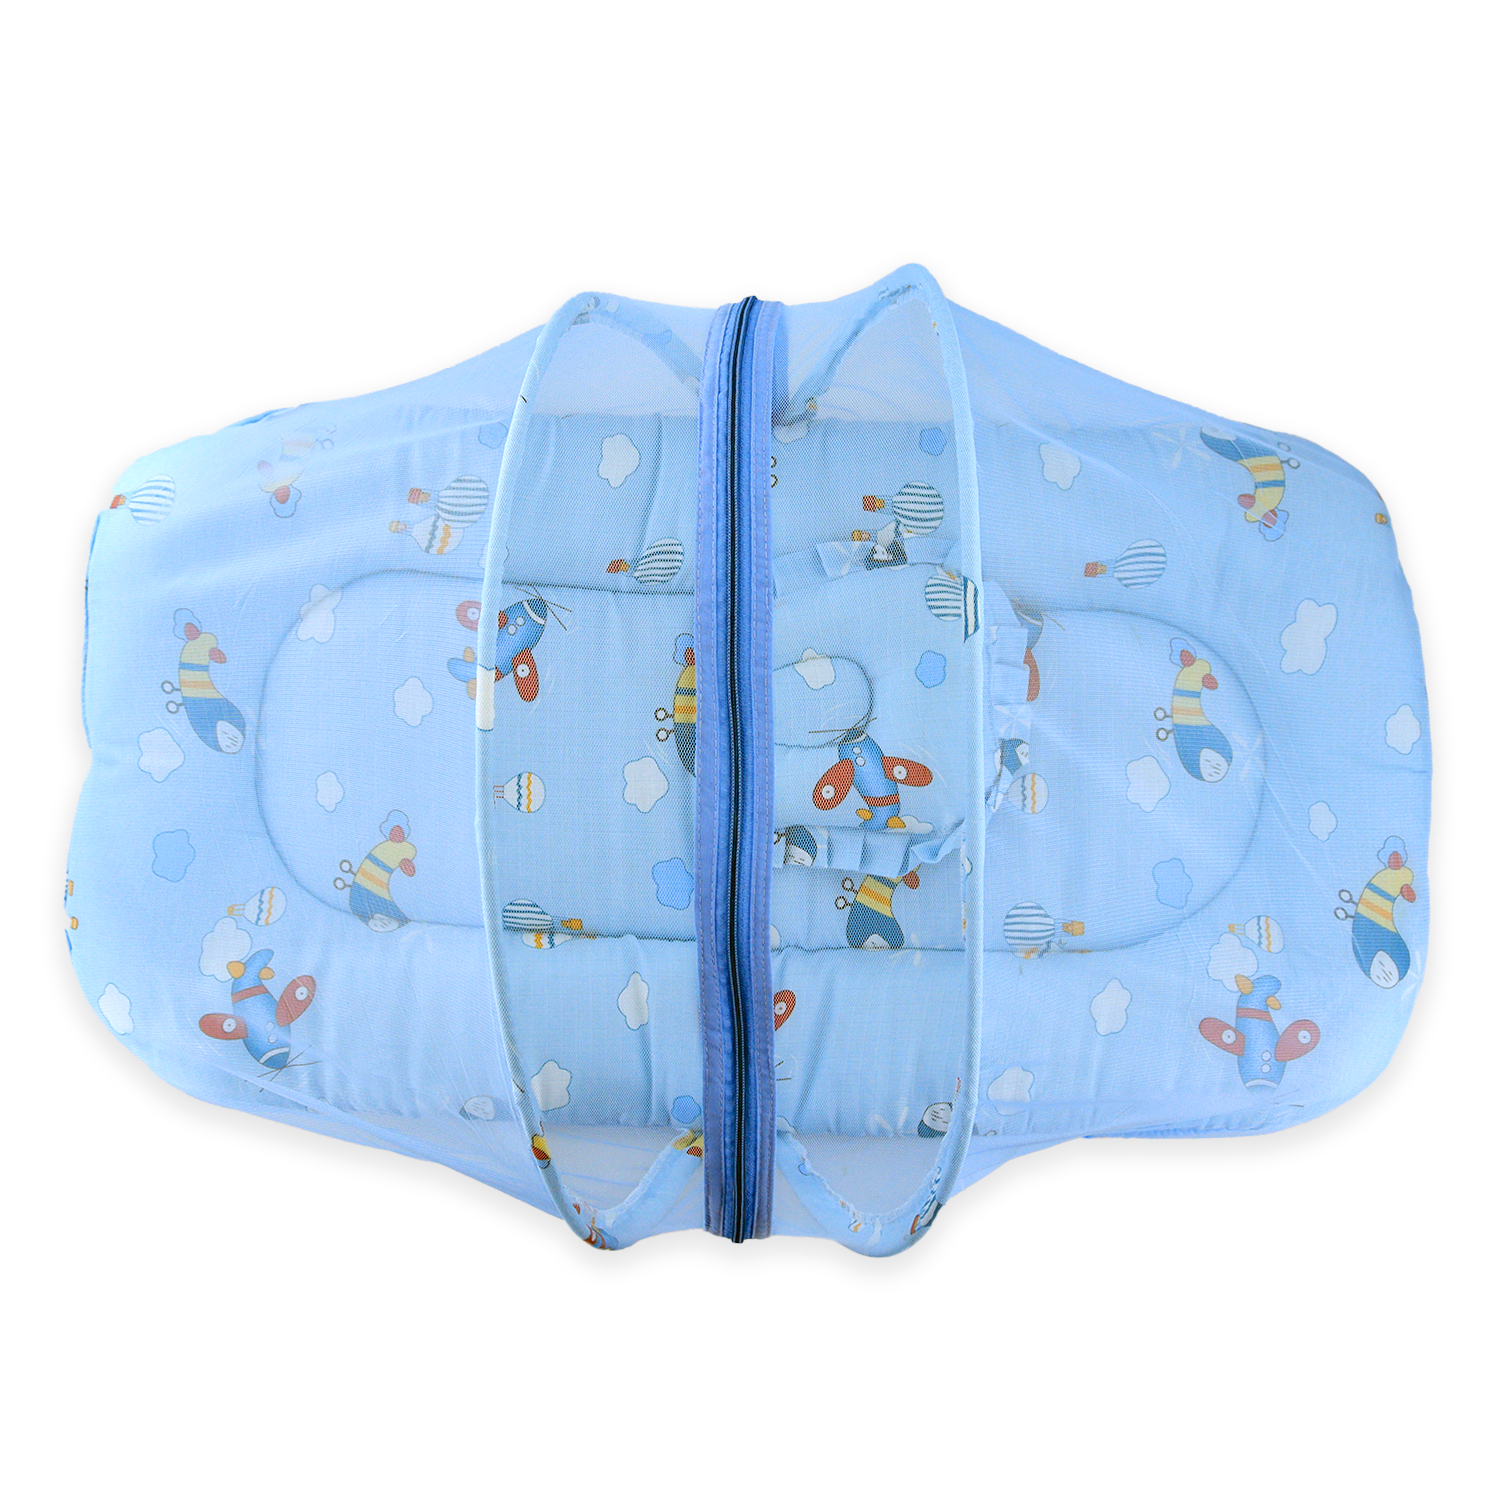 Tent Mattress Set with Neck Pillow Catch Me If You Can Blue